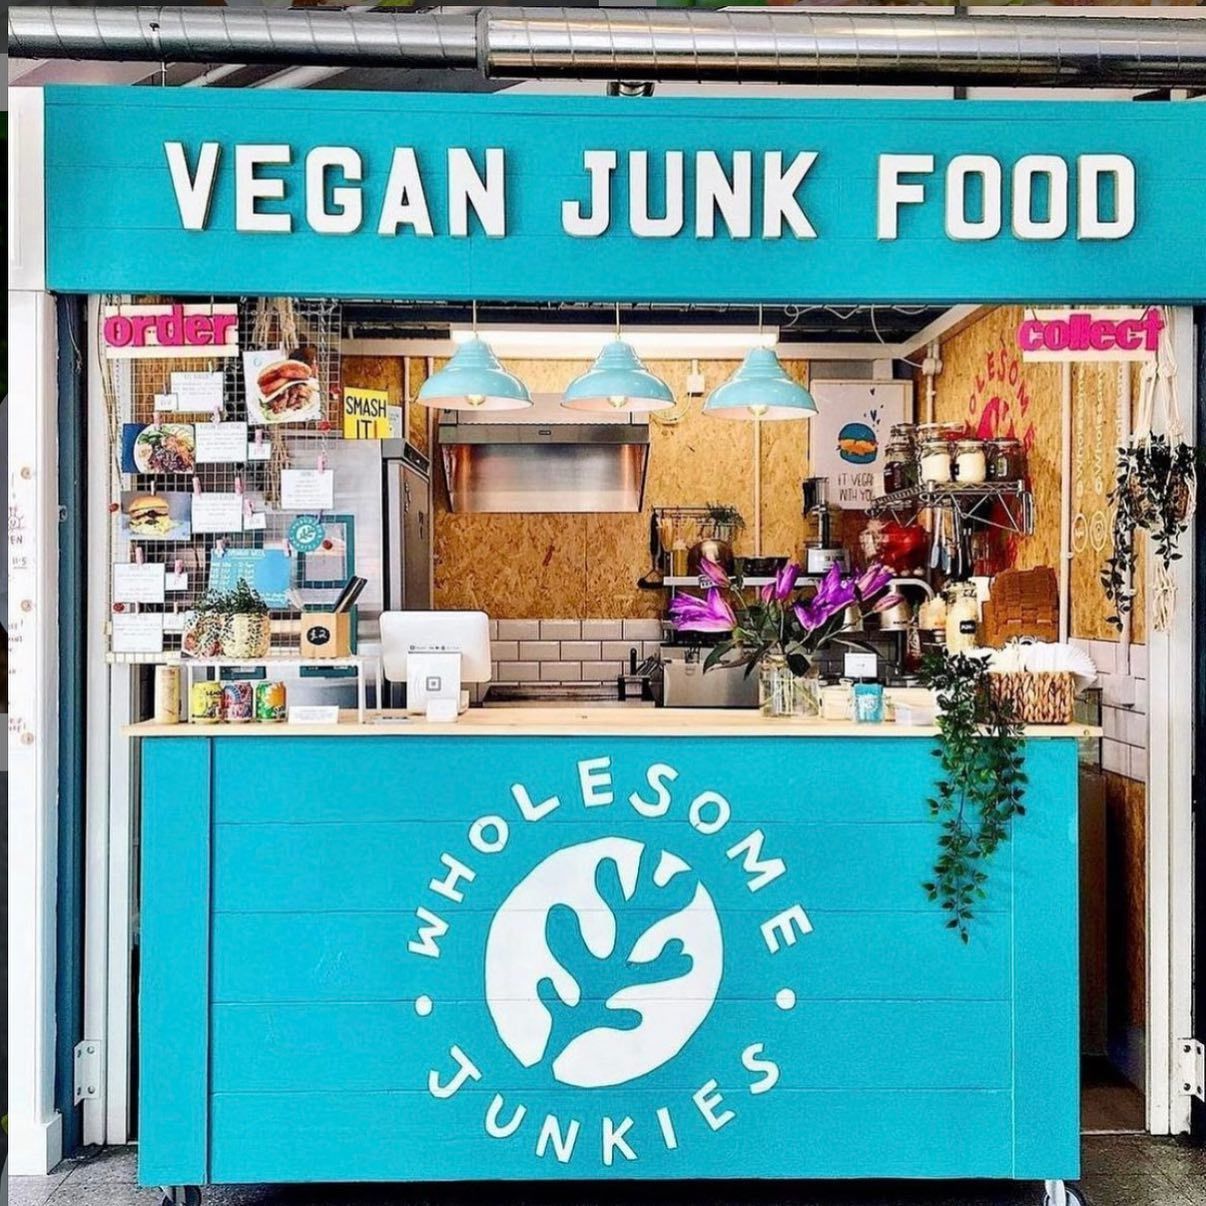 How the vegan stand could look